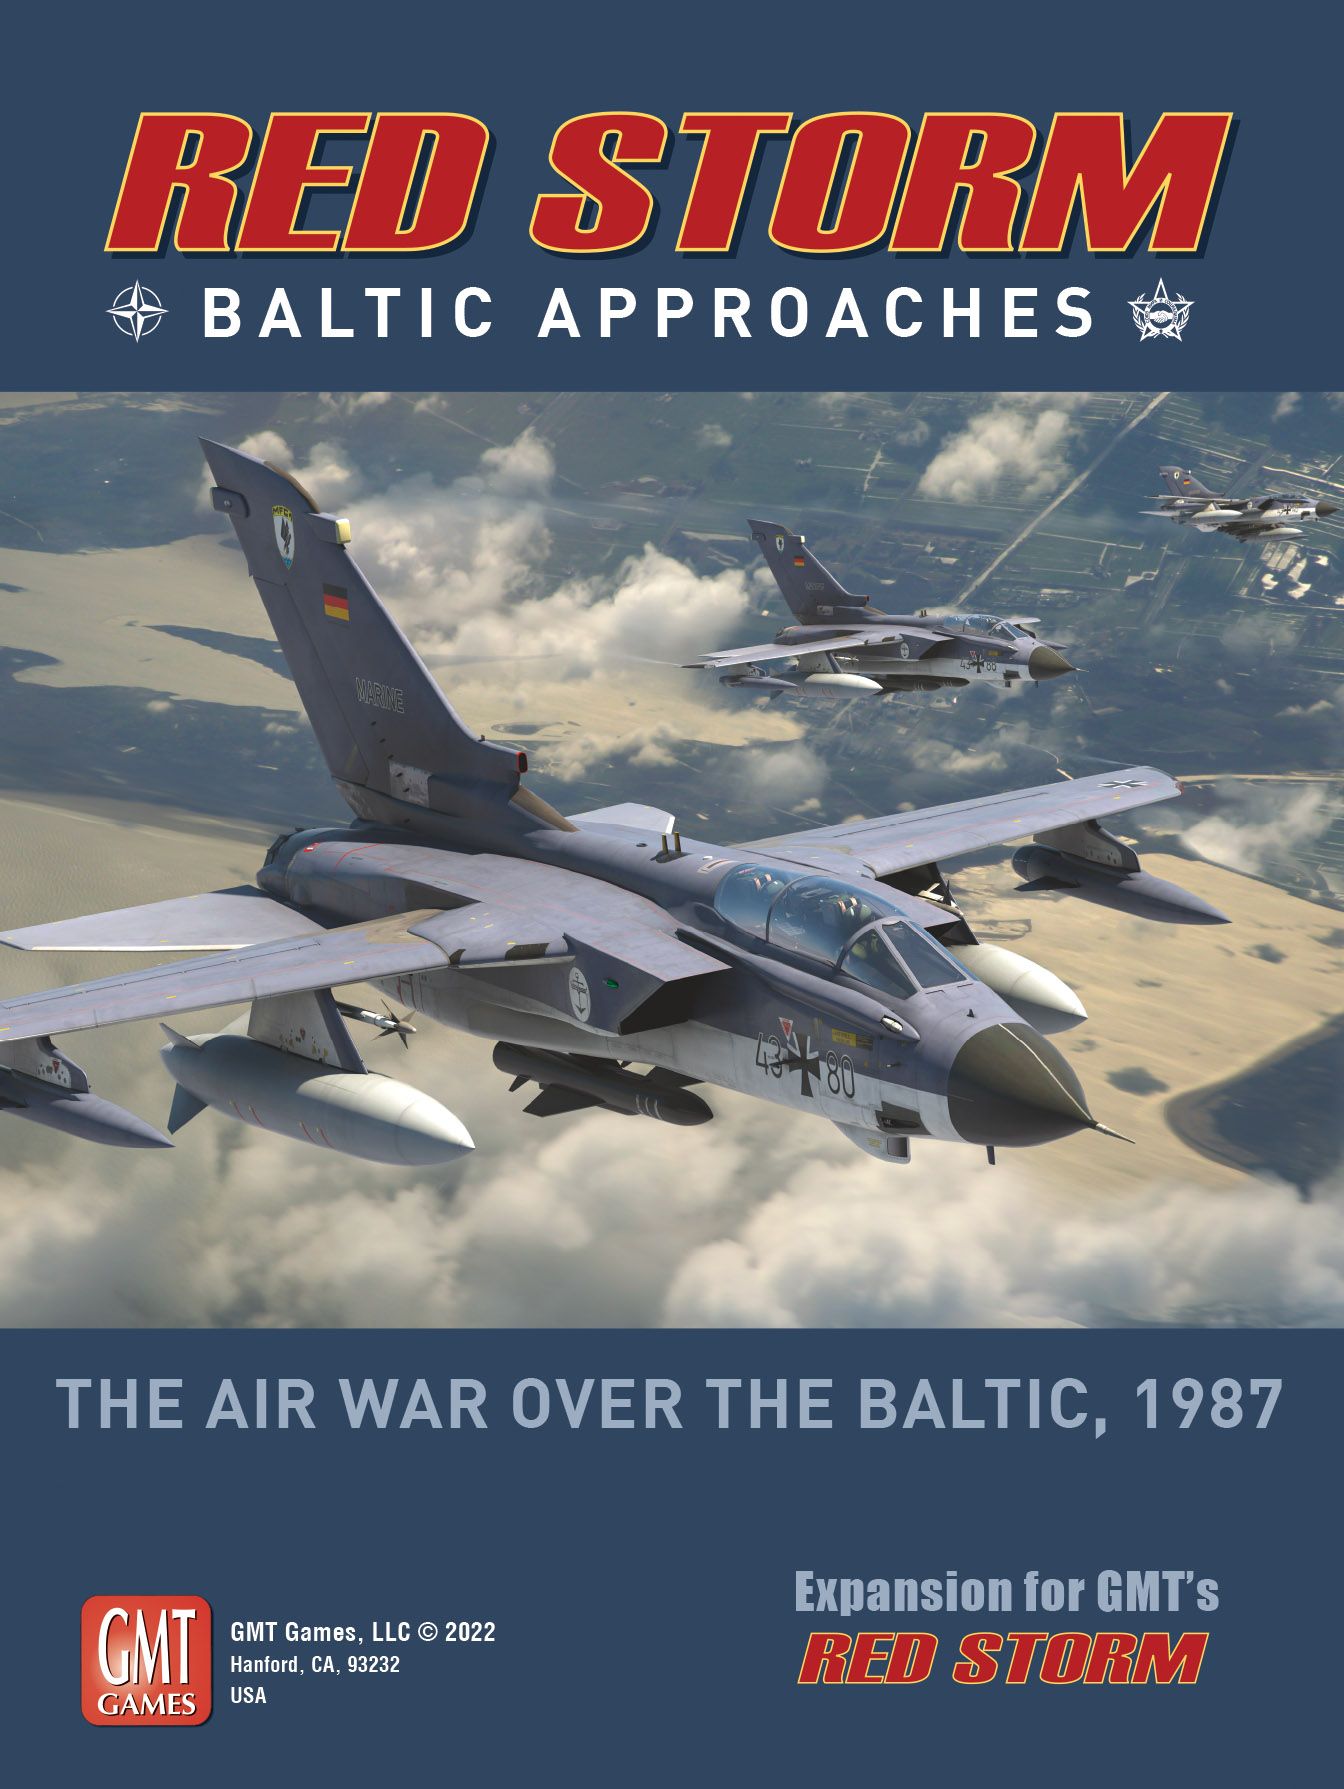 Red Storm: Baltic Approaches – The Air War Over the Baltic, 1987